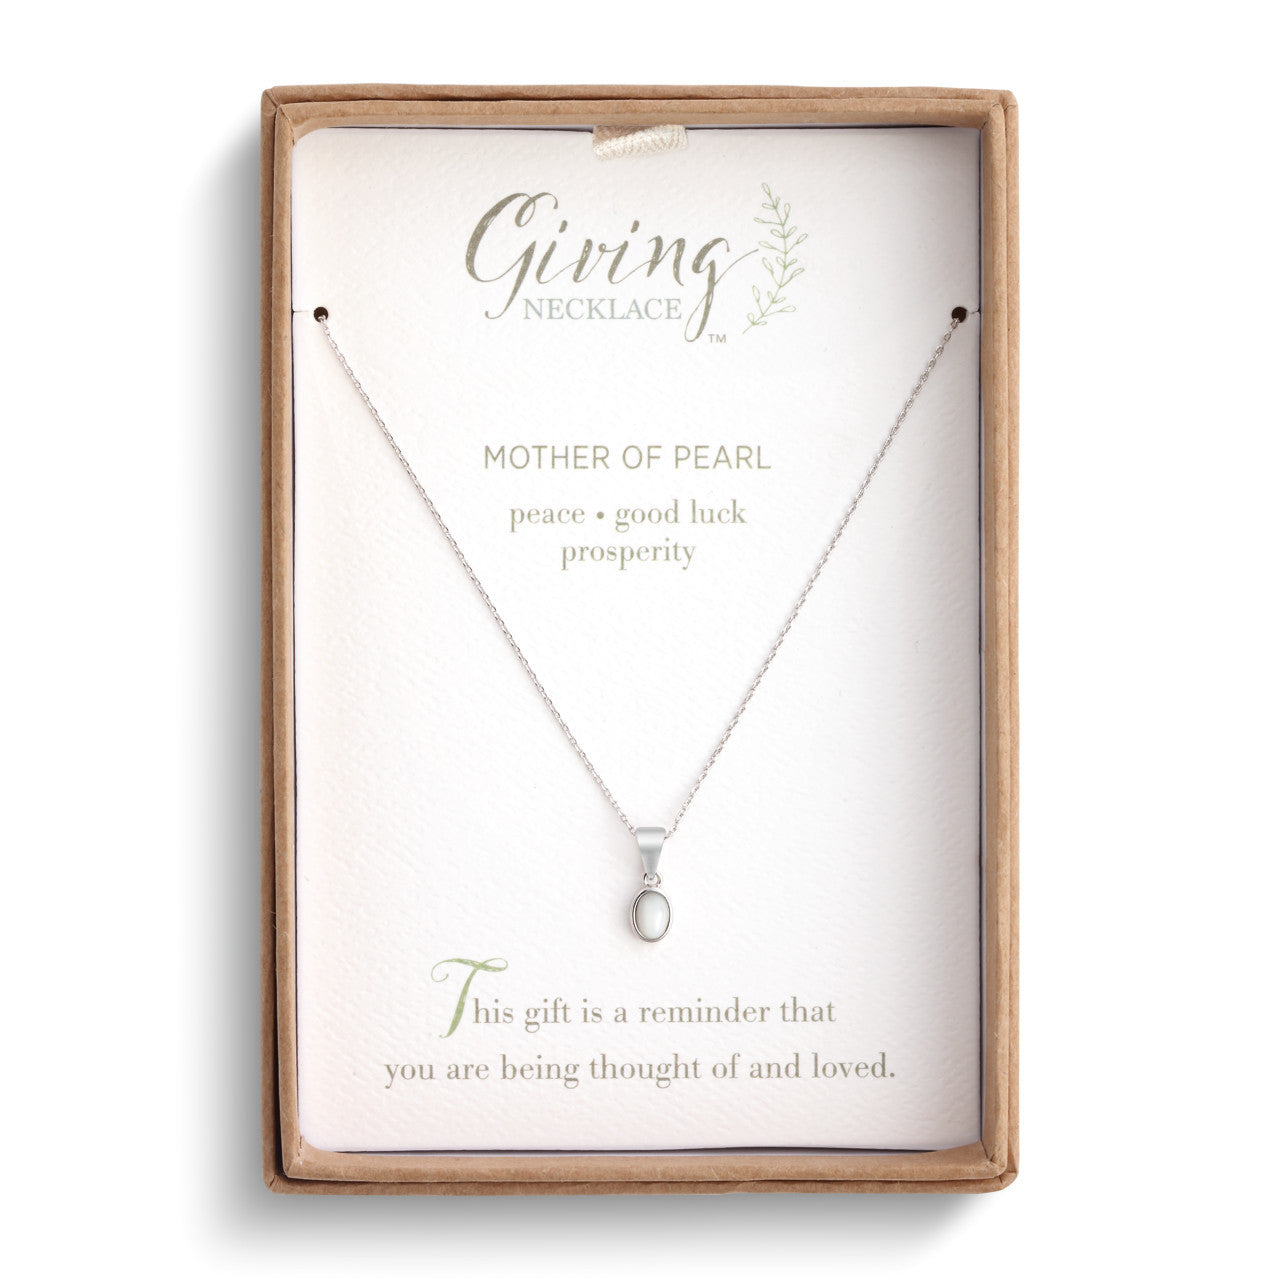 The Giving Necklace - Mother Of Pearl